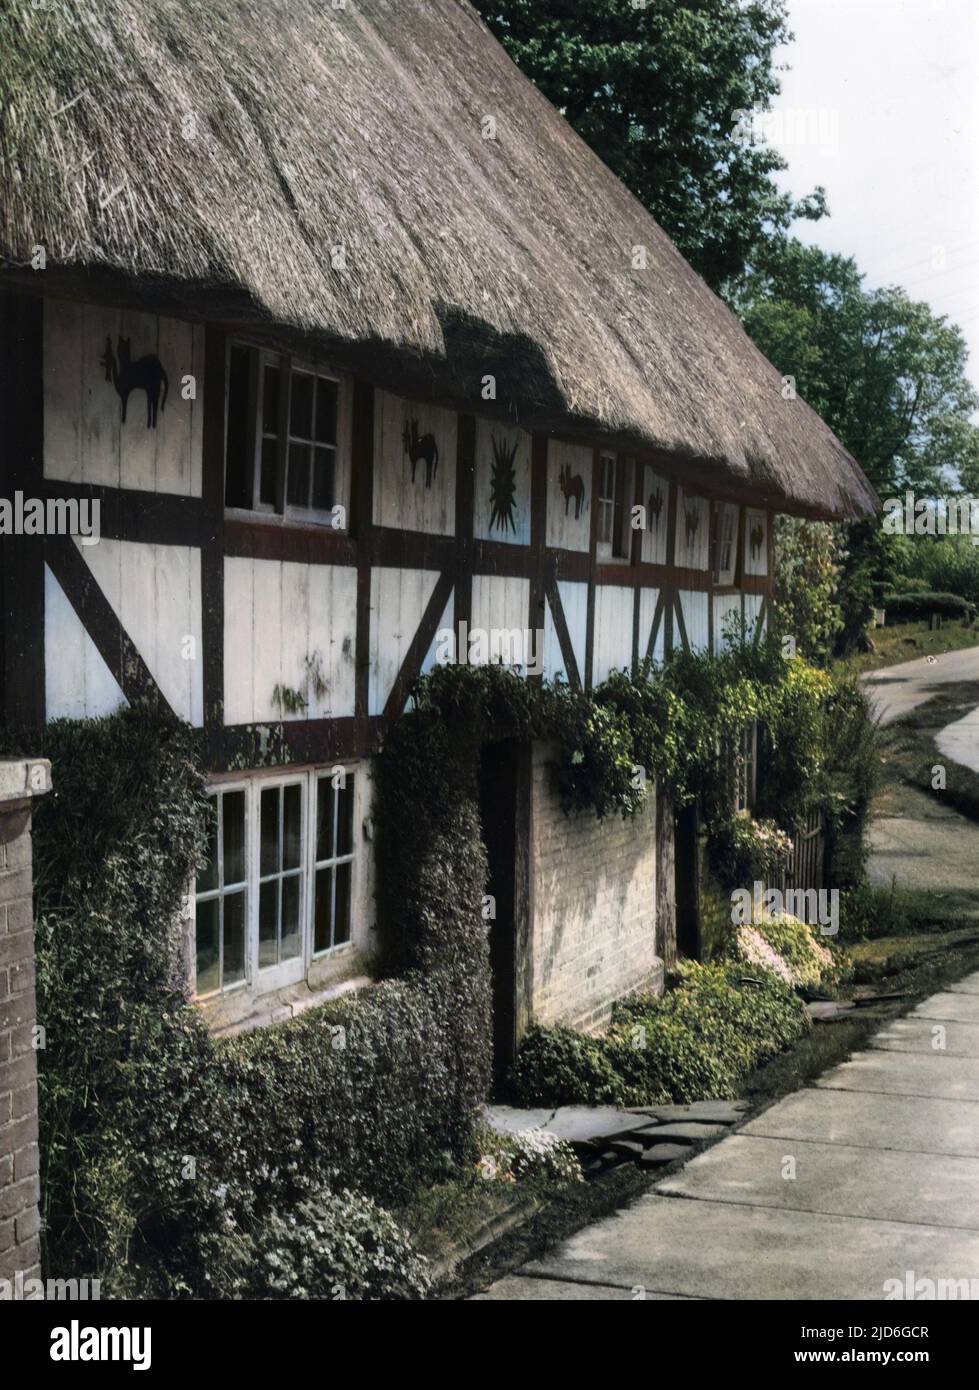 The Cat House' a curious thatched cottage decorated with cat motifs, Henfield, Sussex, England. Colourised version of : 10180439       Date: 1950s Stock Photo